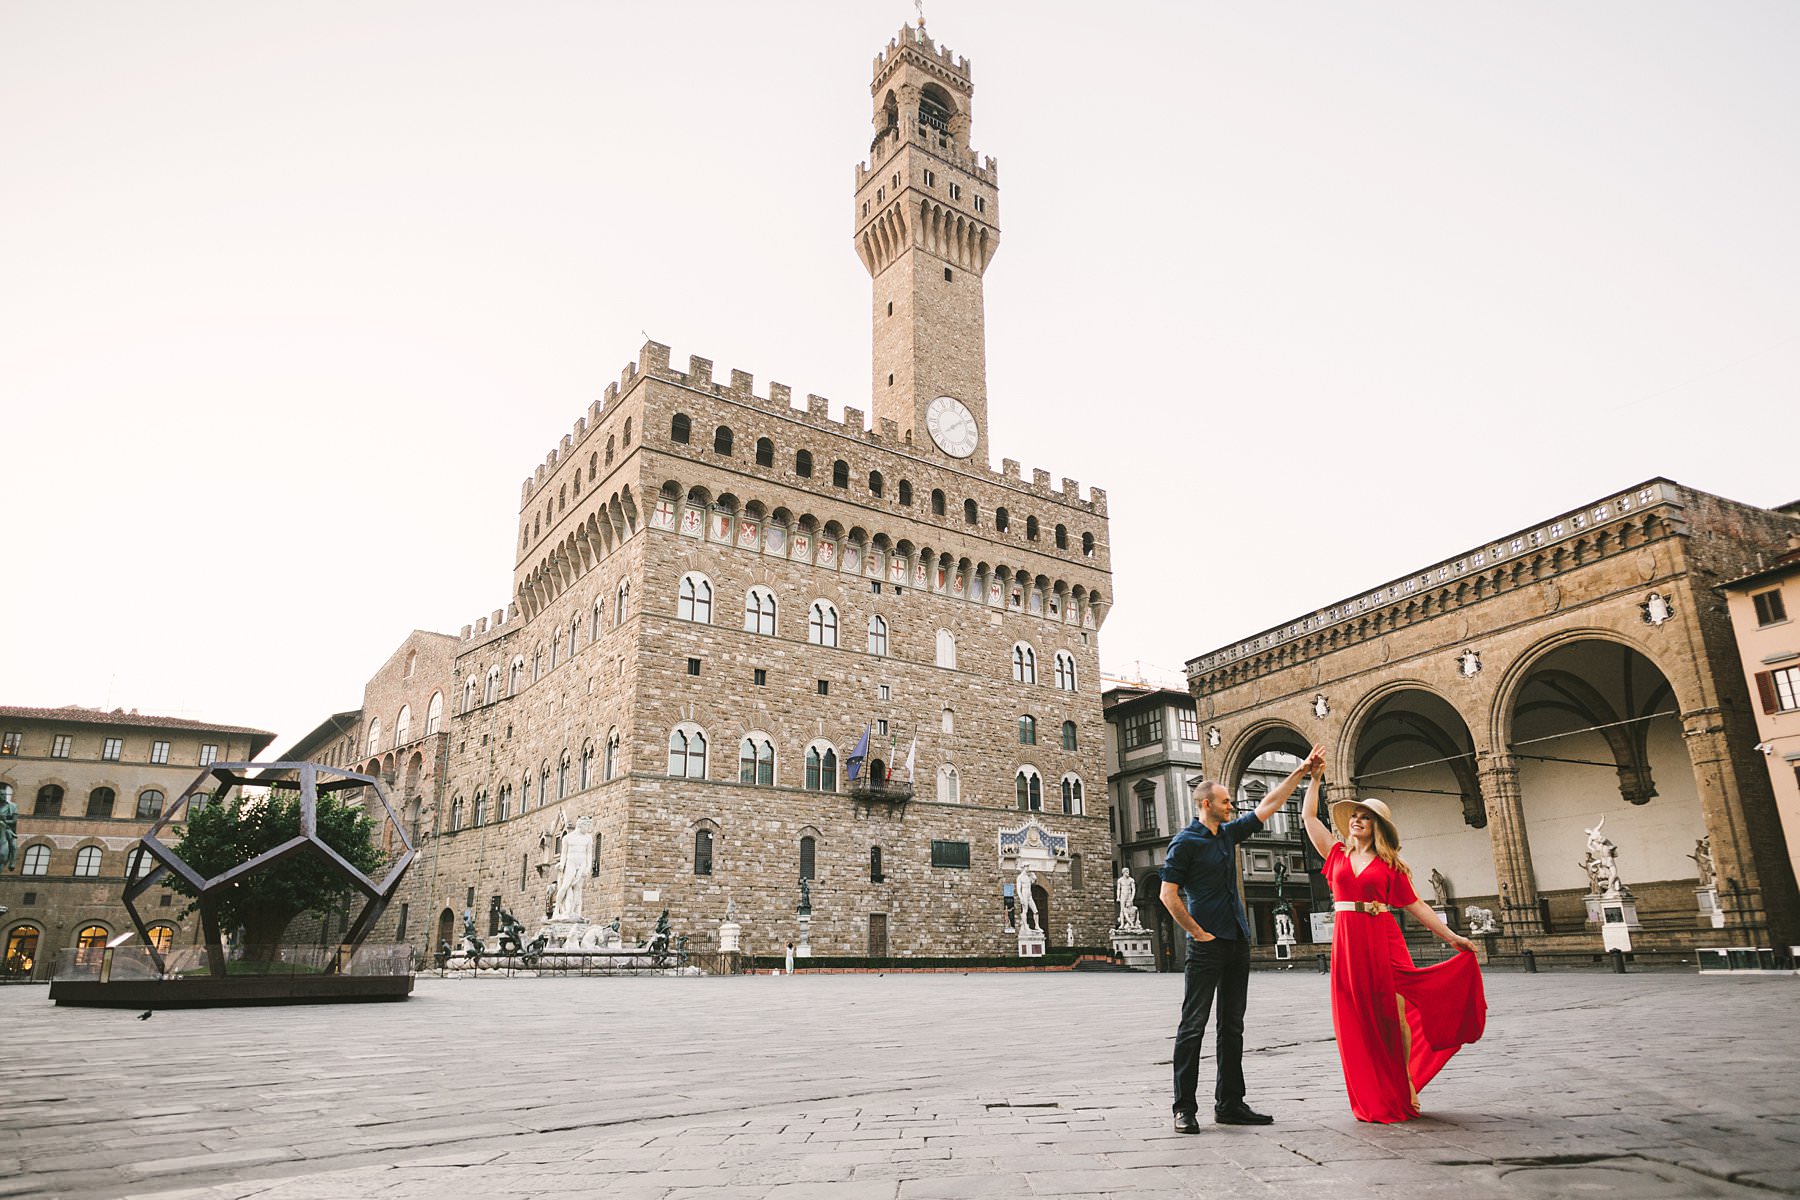 Anniversary photos in Florence, soft as sunrise, red as passion. A beautiful frame, a delicate light, a bright red dress, a milestone to celebrate: these were the ingredients of Anisa and Kevin’s anniversary photos, taken in Florence at sunrise. We strolled the streets of the city, during a session that lasted almost three hours and touched all of the most iconic spots: from Piazza della Signoria to the Uffizi Gallery, from Palazzo Gondi to Piazza S. Firenze, from Ponte Vecchio to Piazzale Michelangelo. The latter is a truly enchanted place from which you can enjoy a breathtaking view of the city: the most wonderful photo setting anyone could ask for